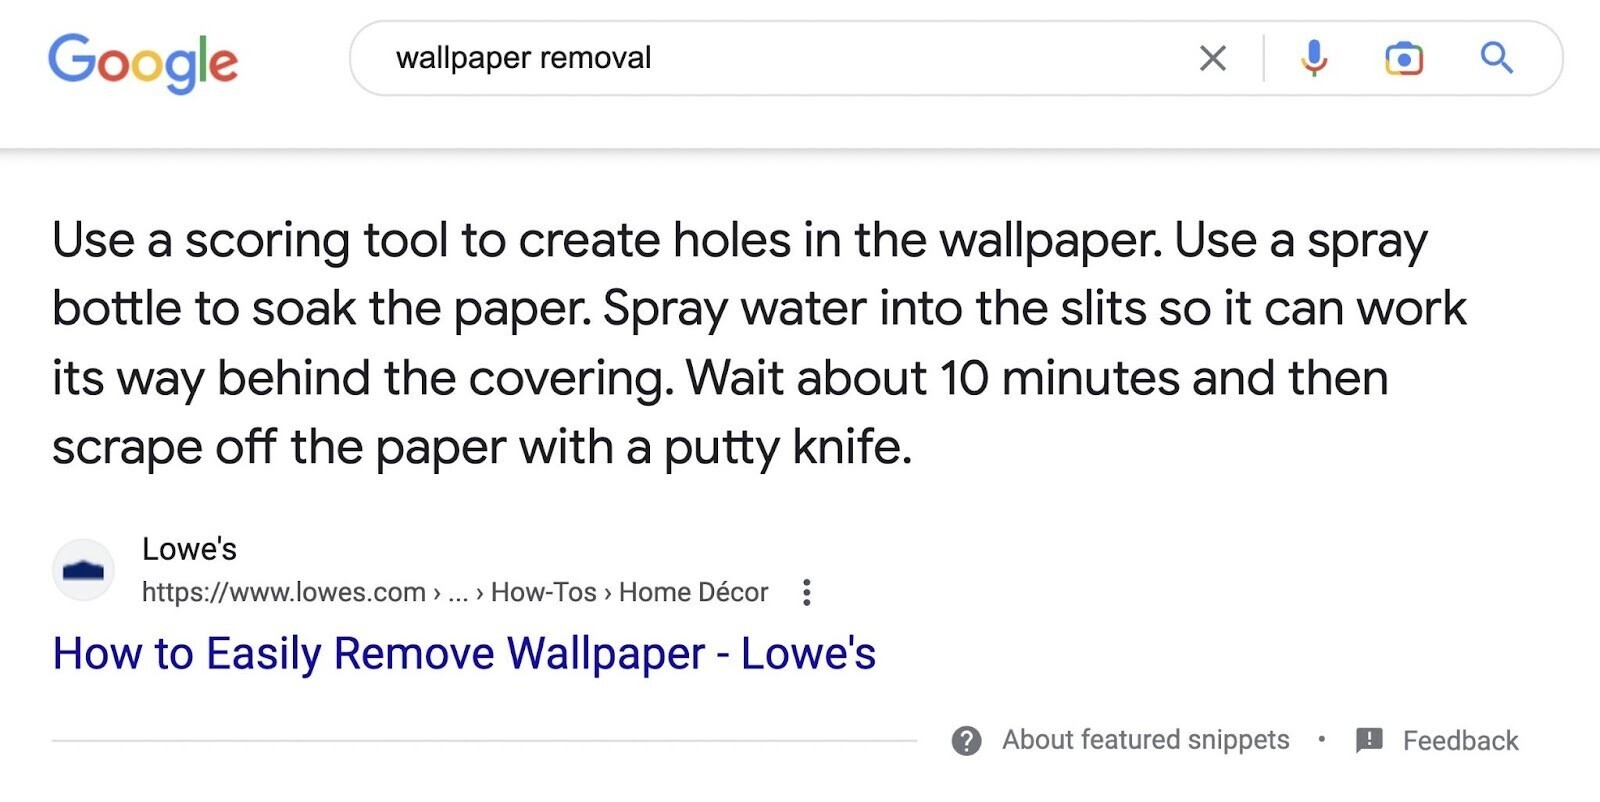 Featured snippet for wallpaper removal keywords in SERP